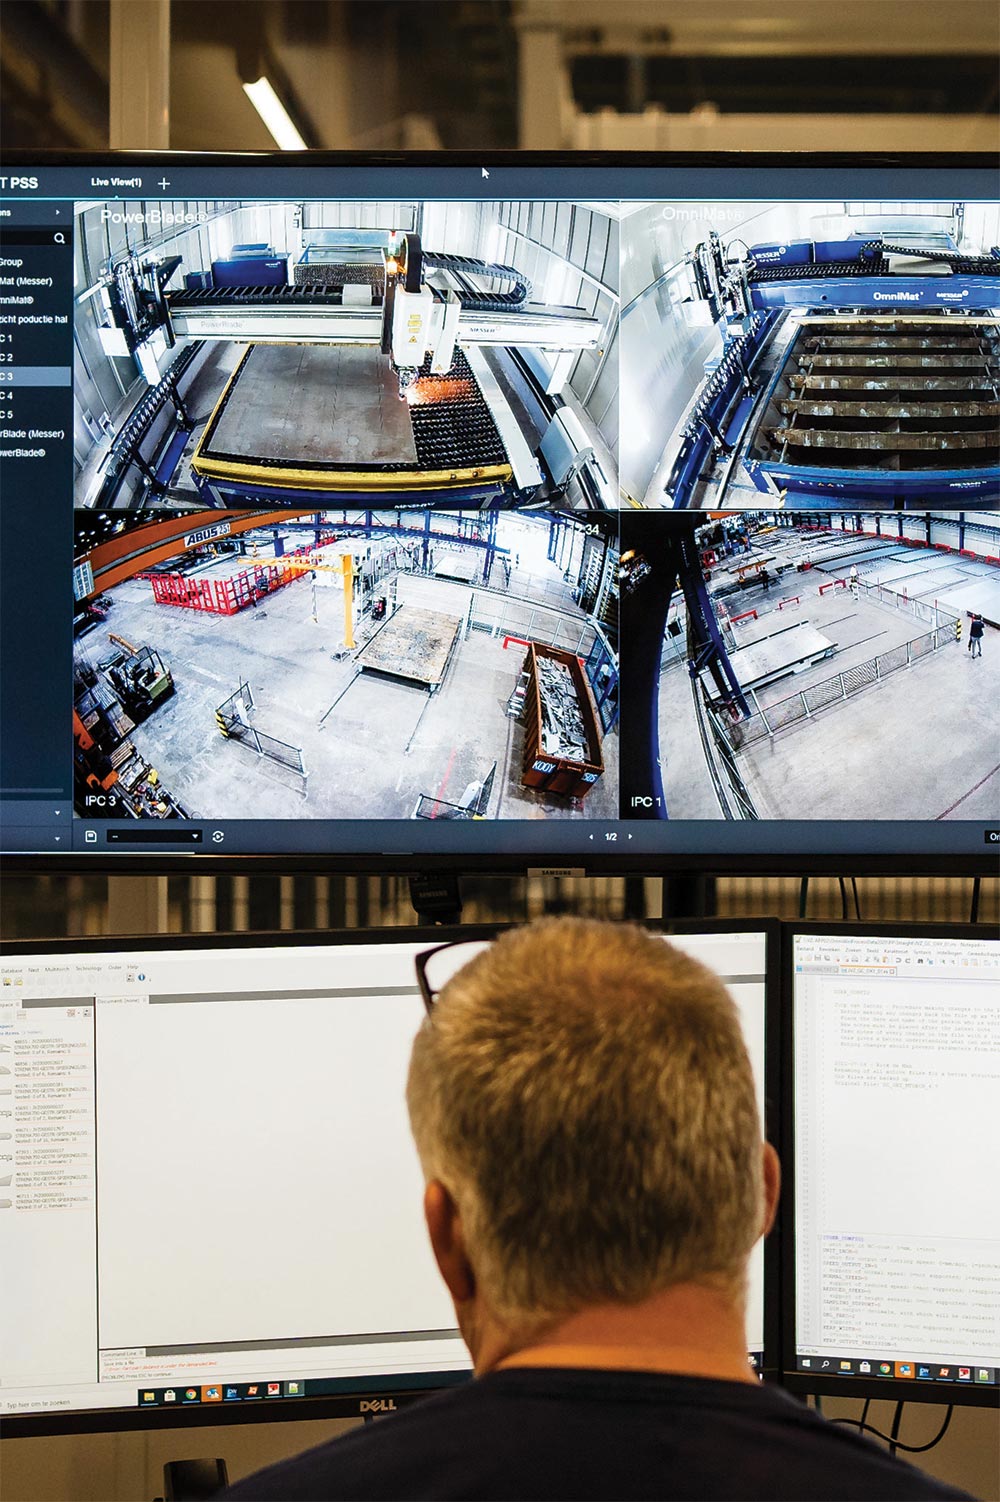 An operator in the control room monitors all cutting operations and related tasks.